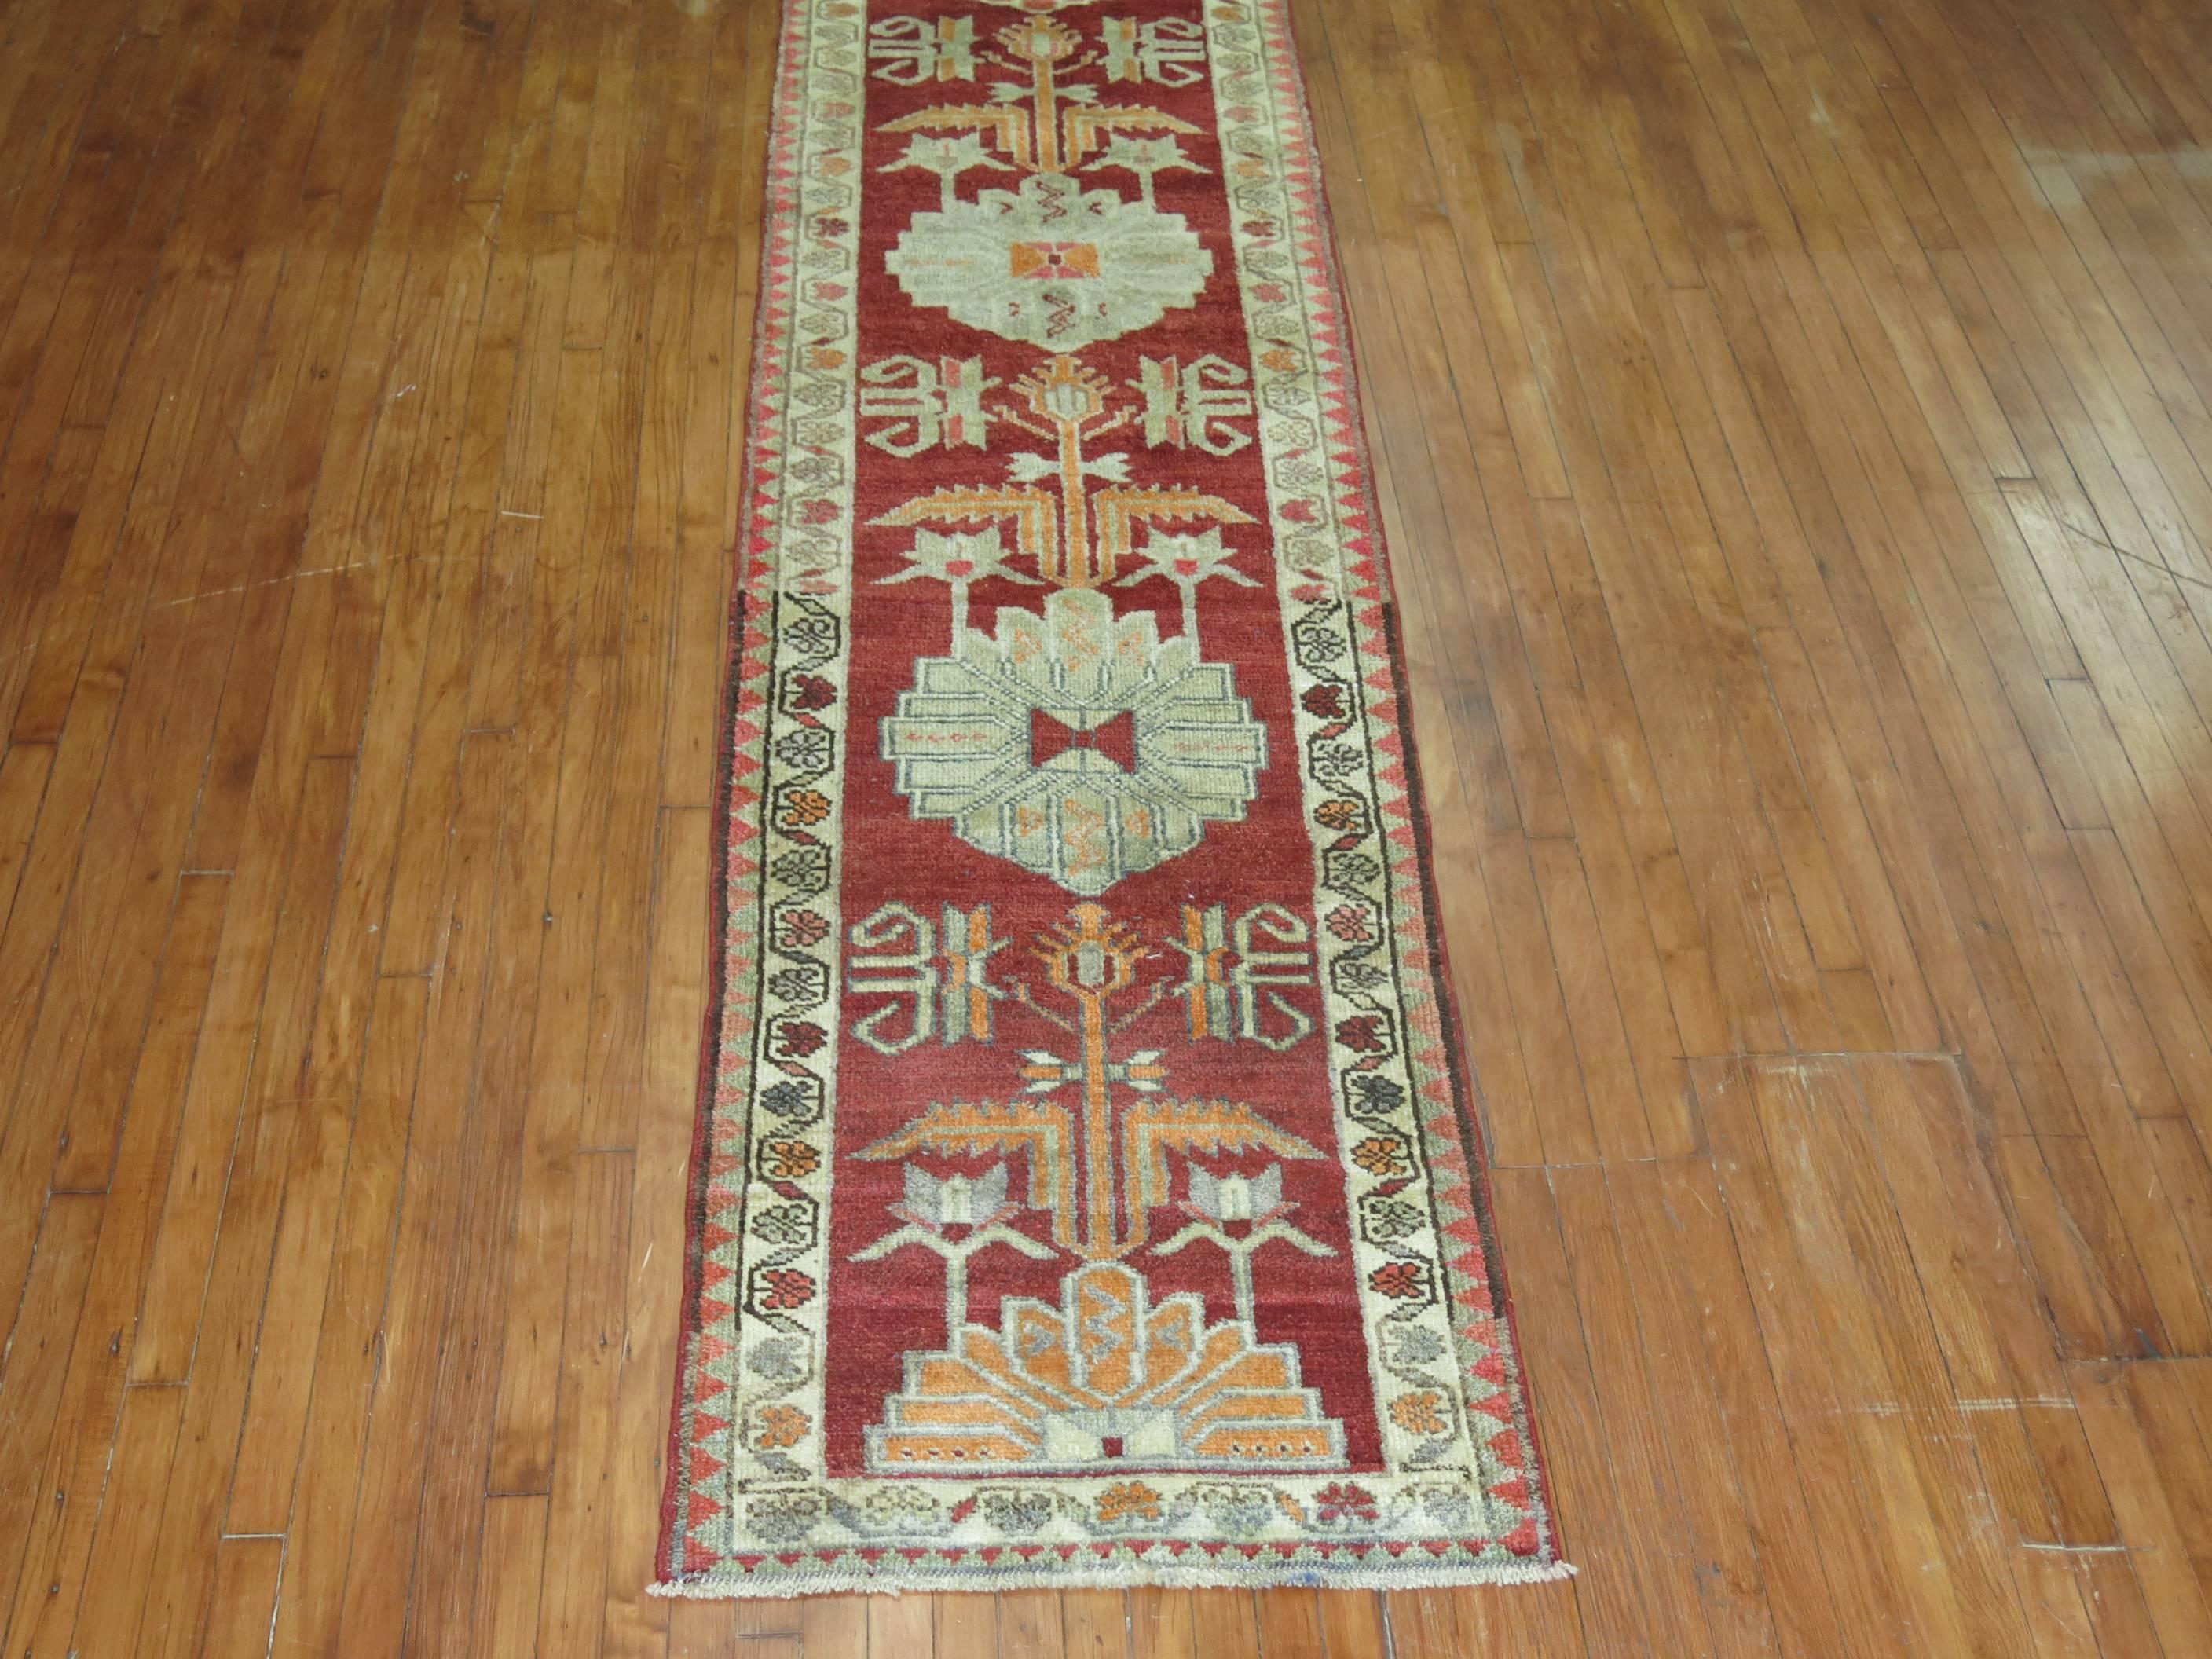 Narrow and long vintage Turkish Anatolian runner in a deep red tone

2'9'' x 13'7''